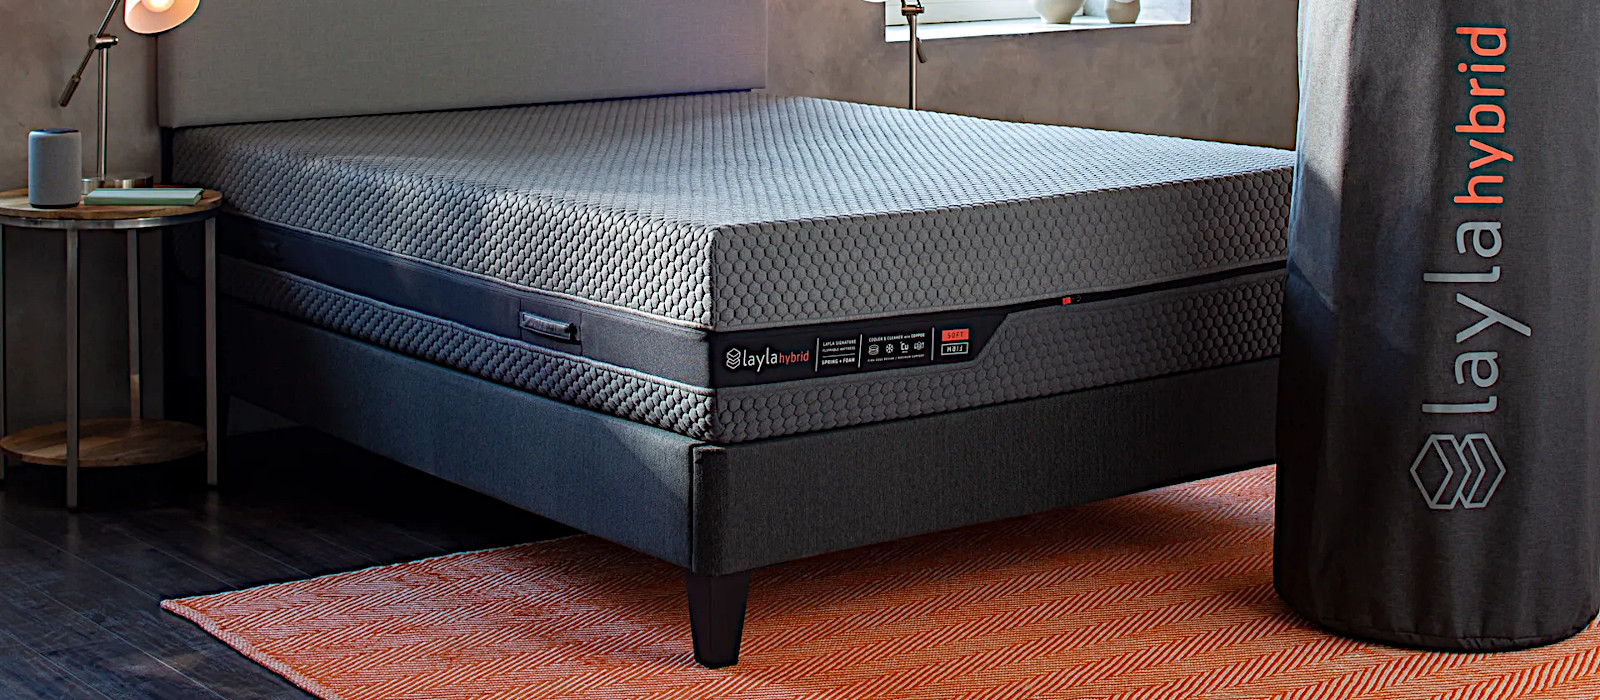 Cut-price copper infused flippable hybrid mattress